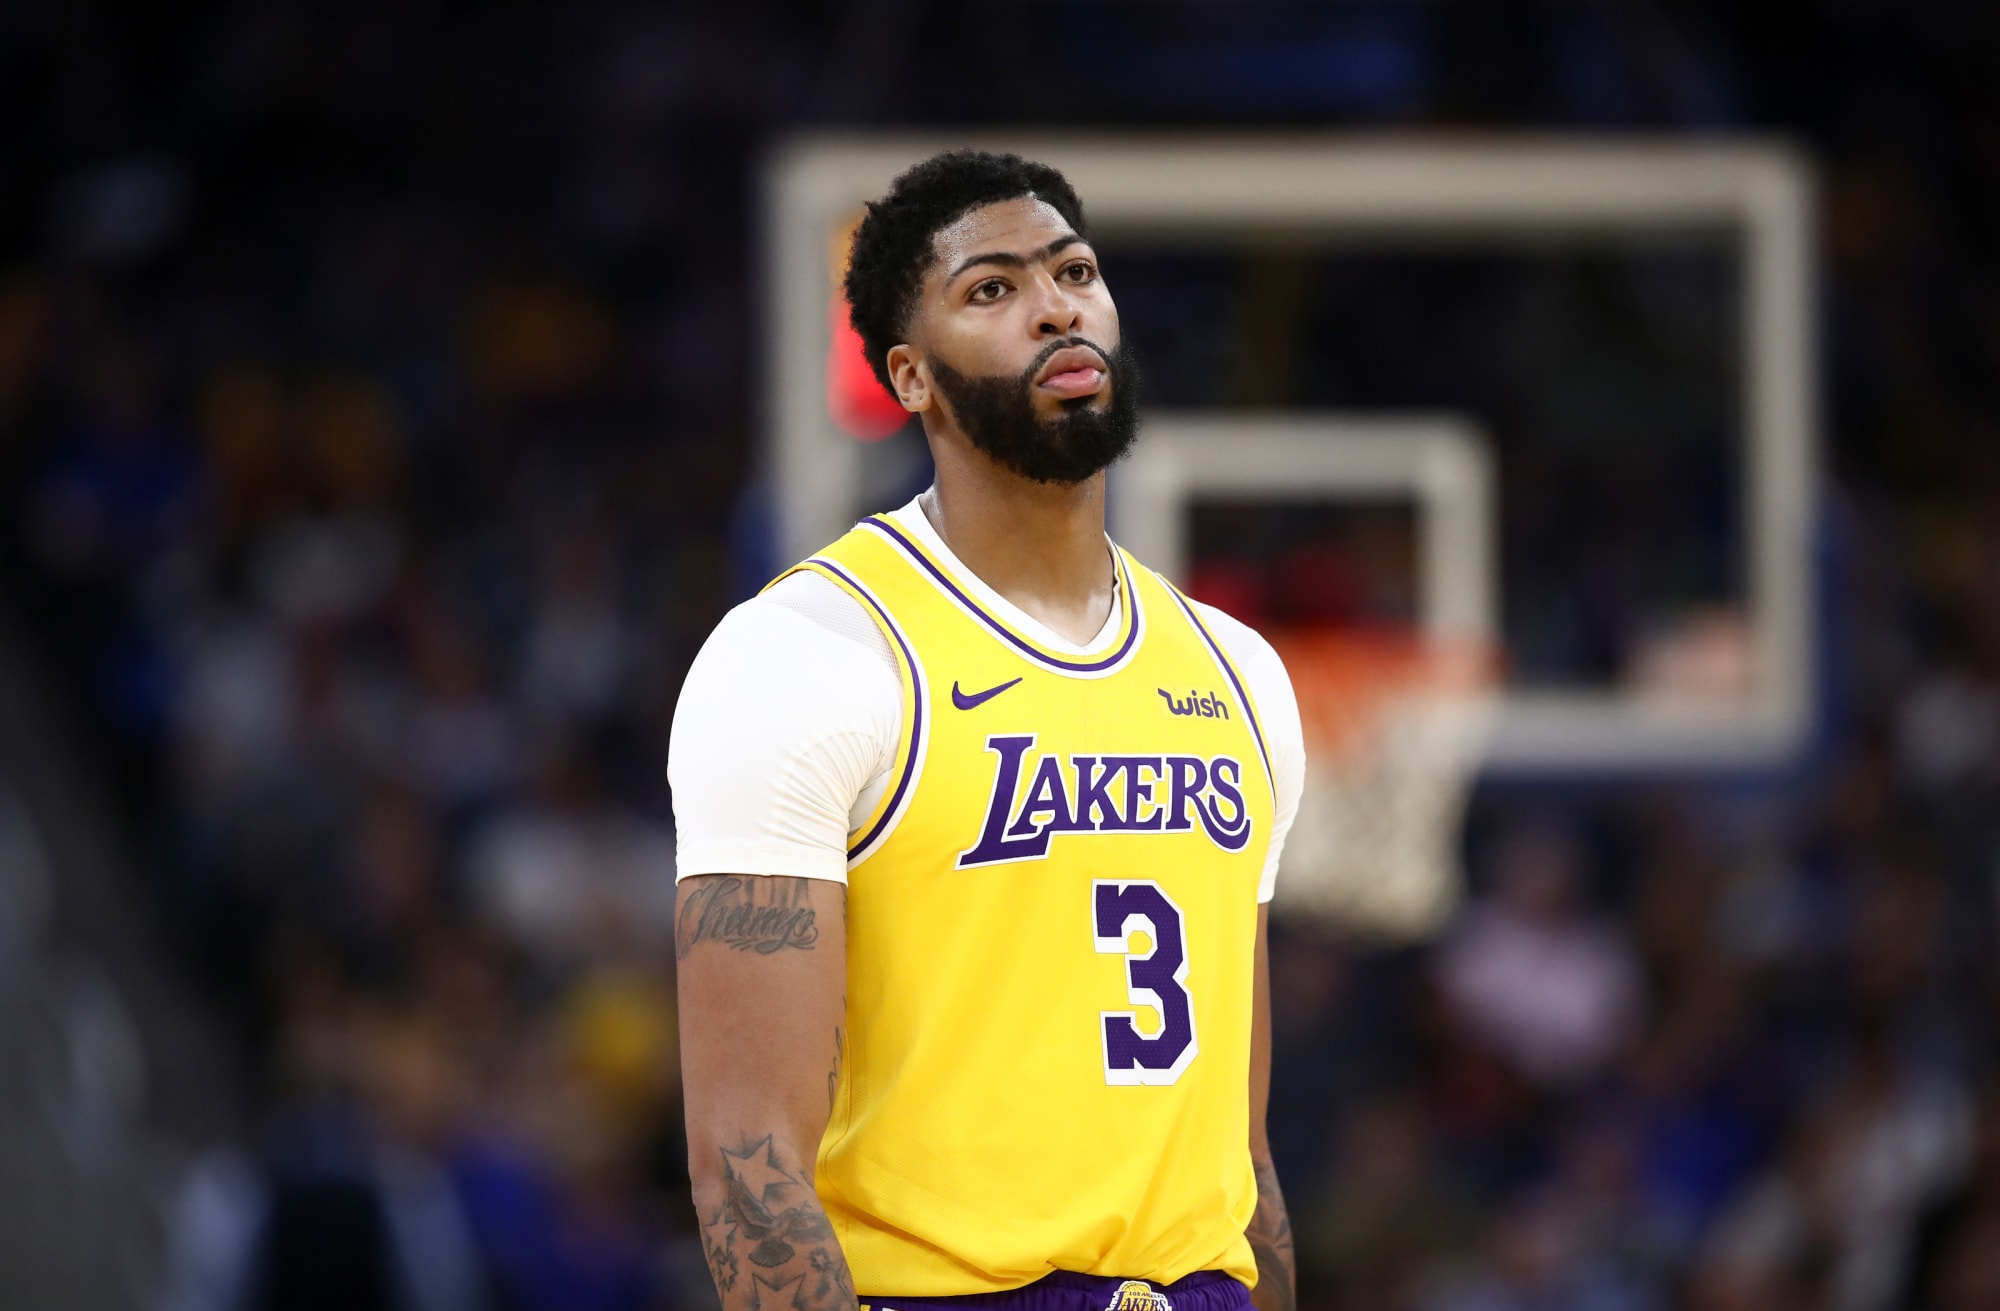 Los Angeles Lakers showed three strengths that will lead to a title